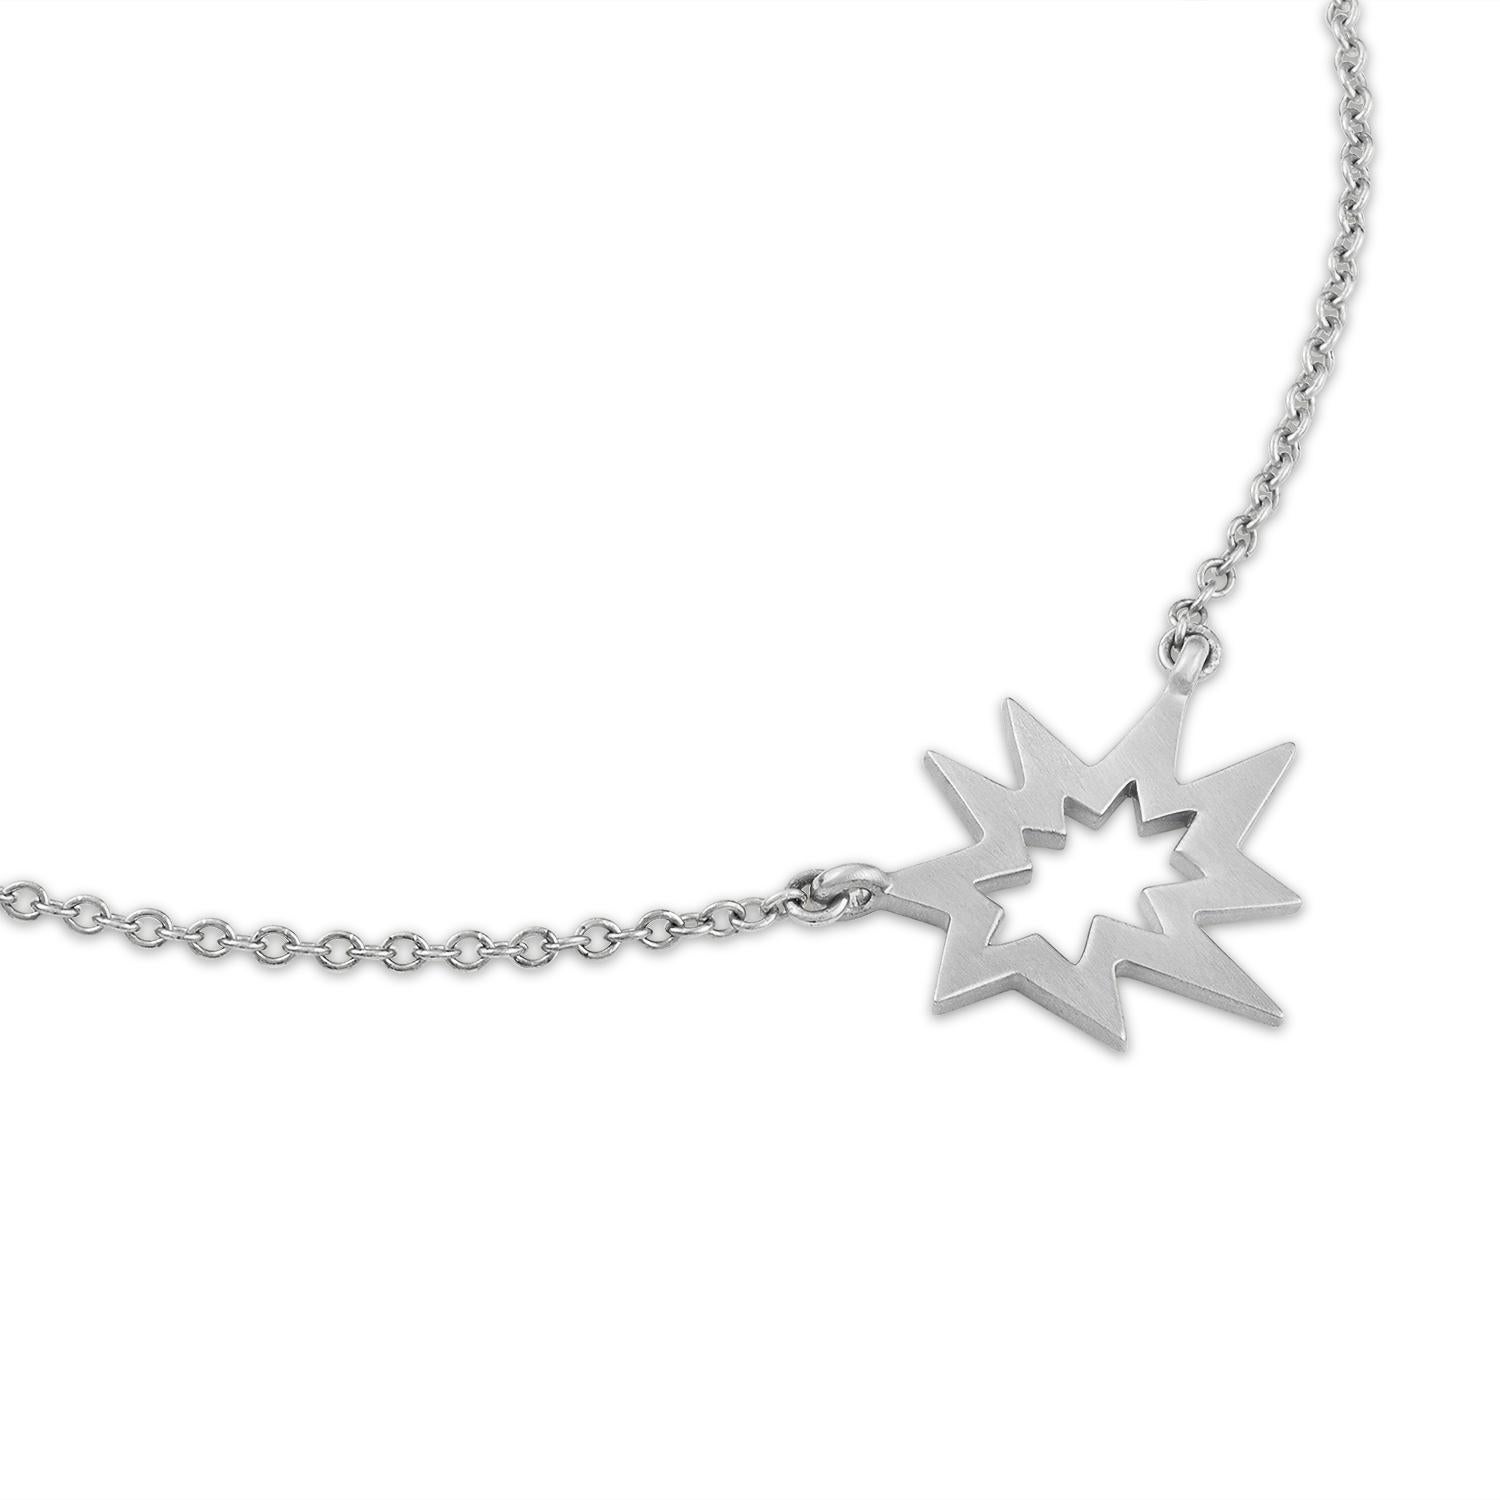 Bright and airy! Our iconic matte silver Stellina necklace is fresher than ever in its new Nova incarnation. Fabulous unique star is suspended on a substantial silver chain. Perfect by itself or layered.  KAPOW!
 

matte sterling silver 
1